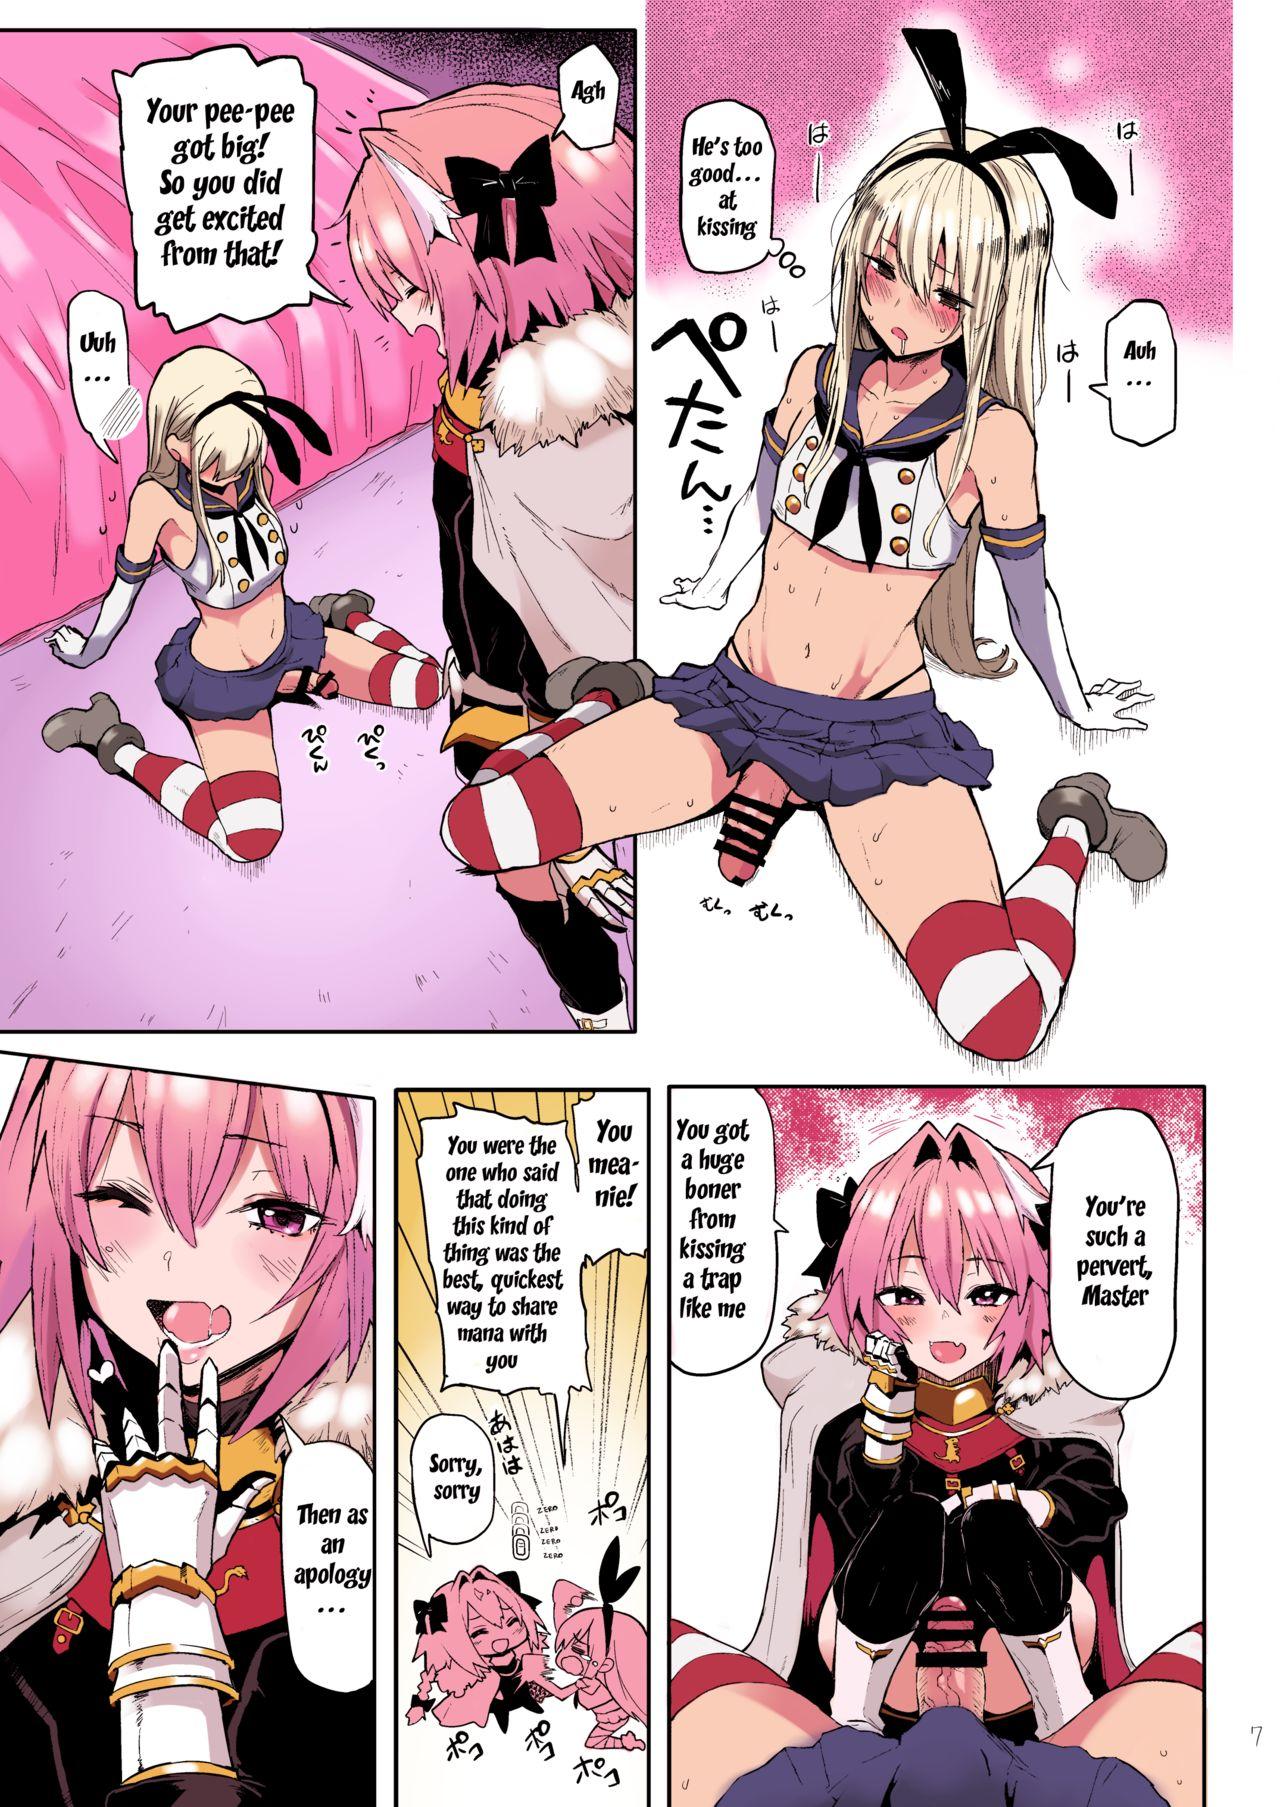 Amante Astolfo x Astolfo - Fate grand order Skype - Page 7